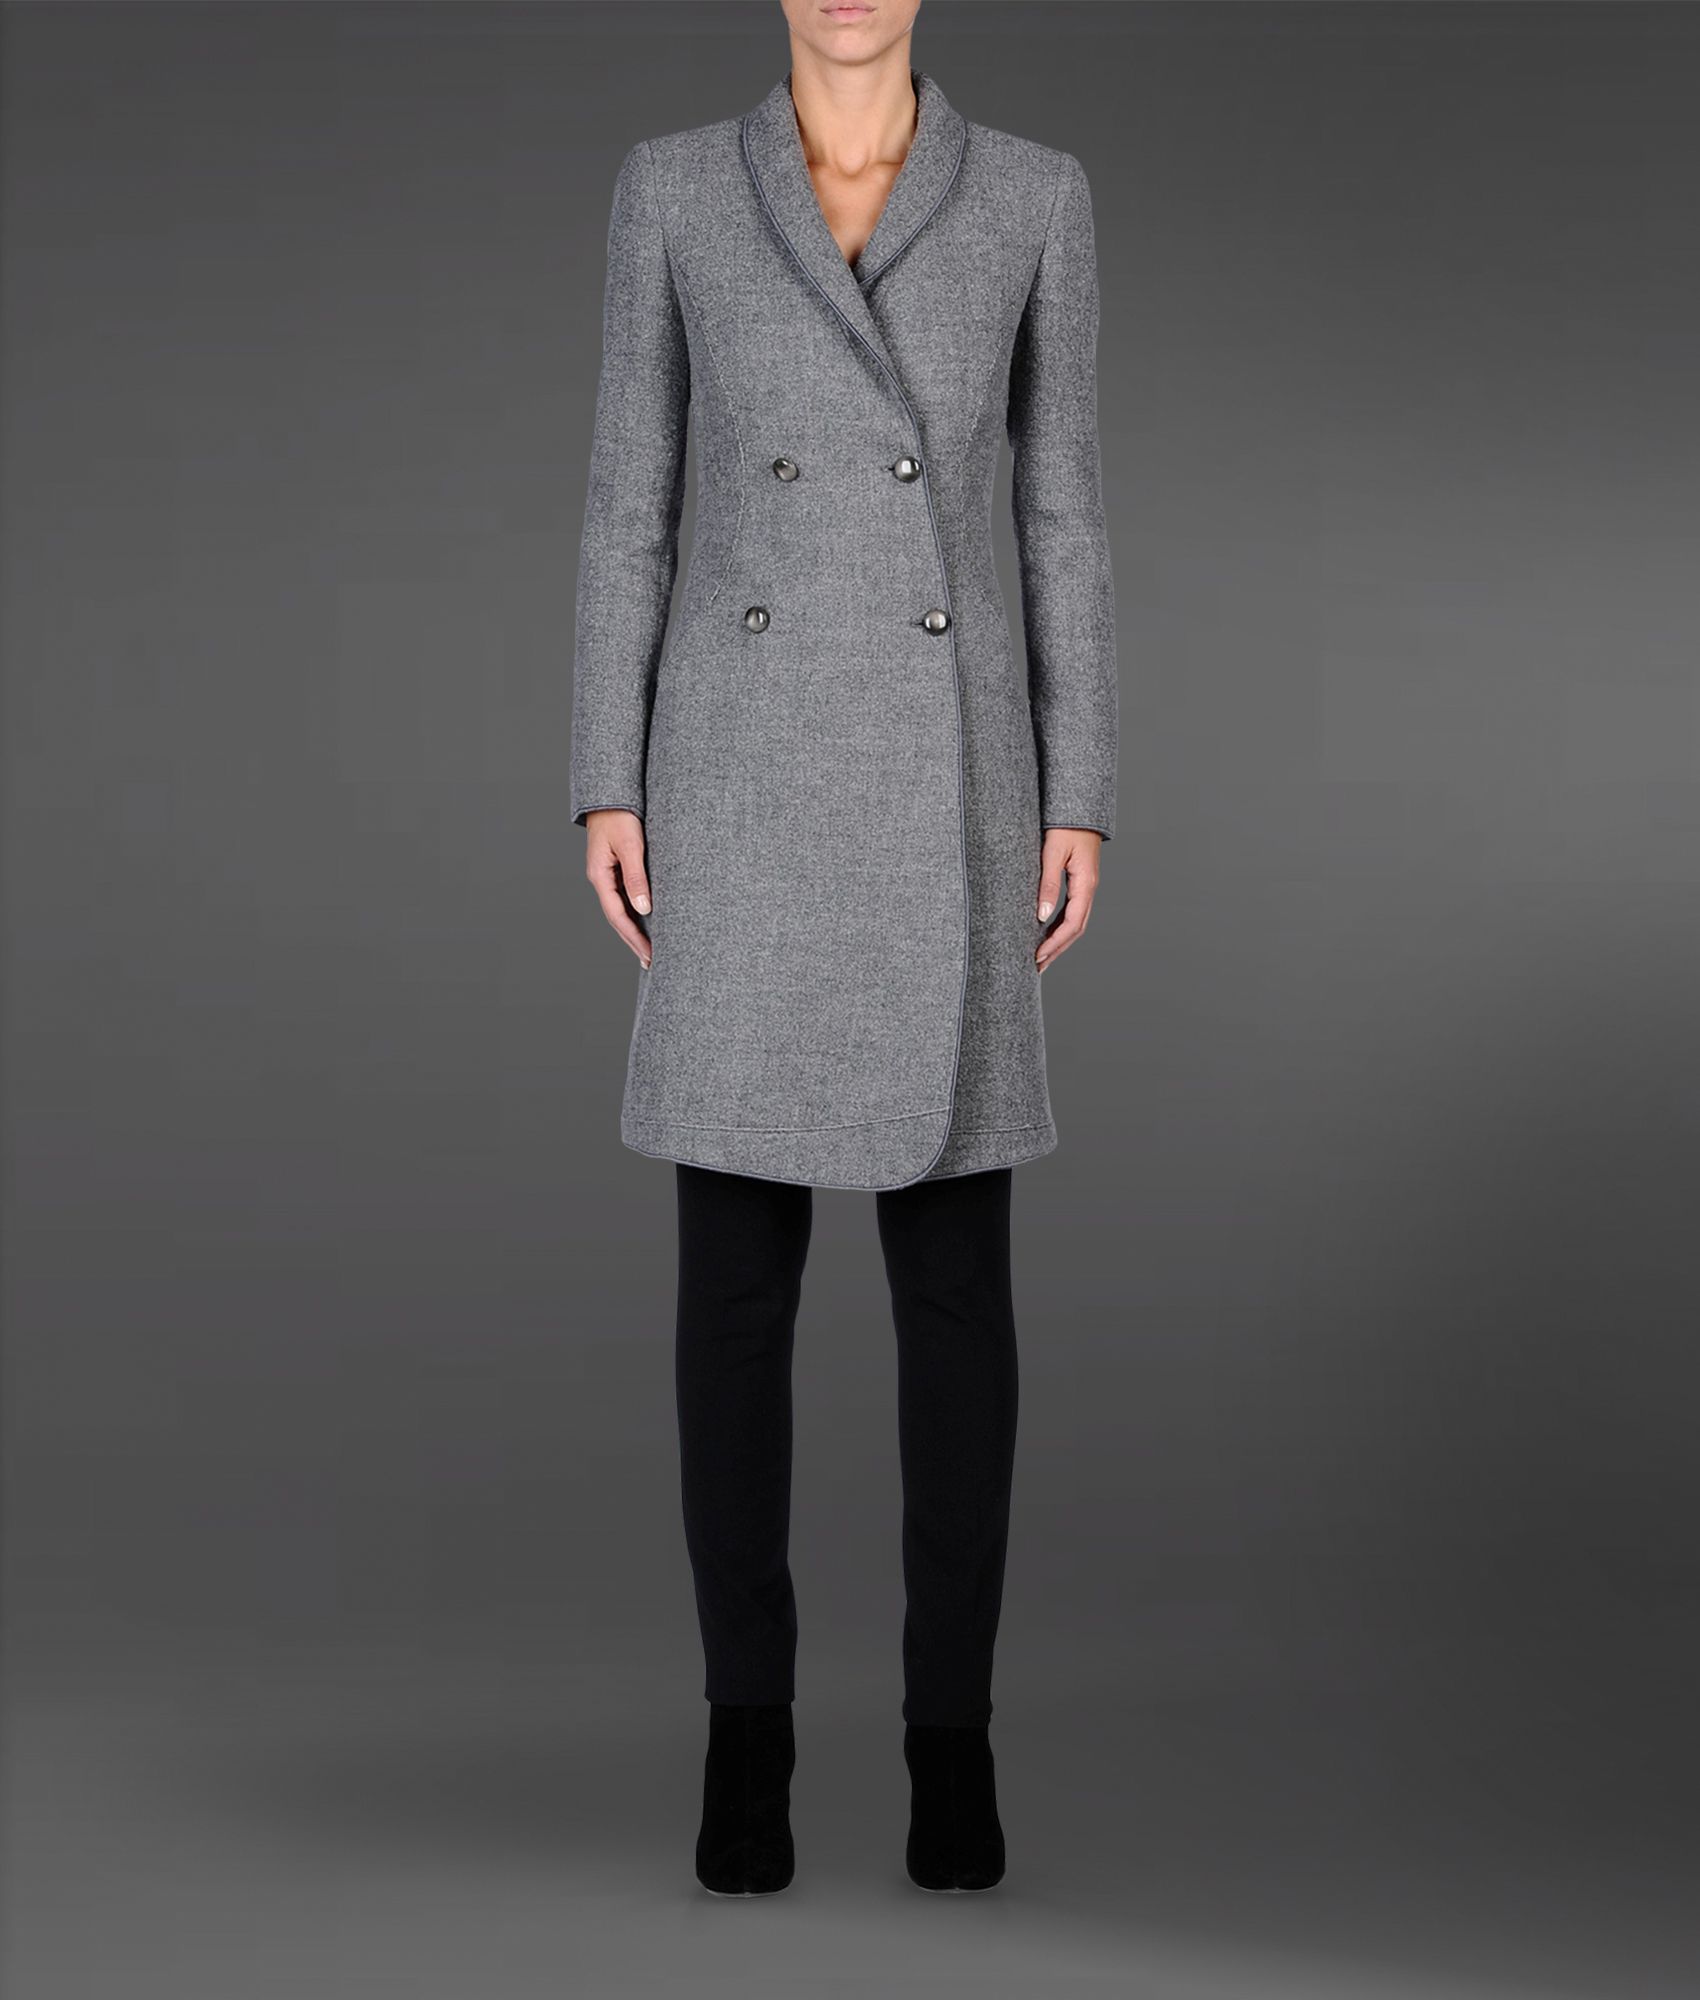 Emporio Armani Double Breasted Coat in Boiled Wool in Grey (Gray) - Lyst